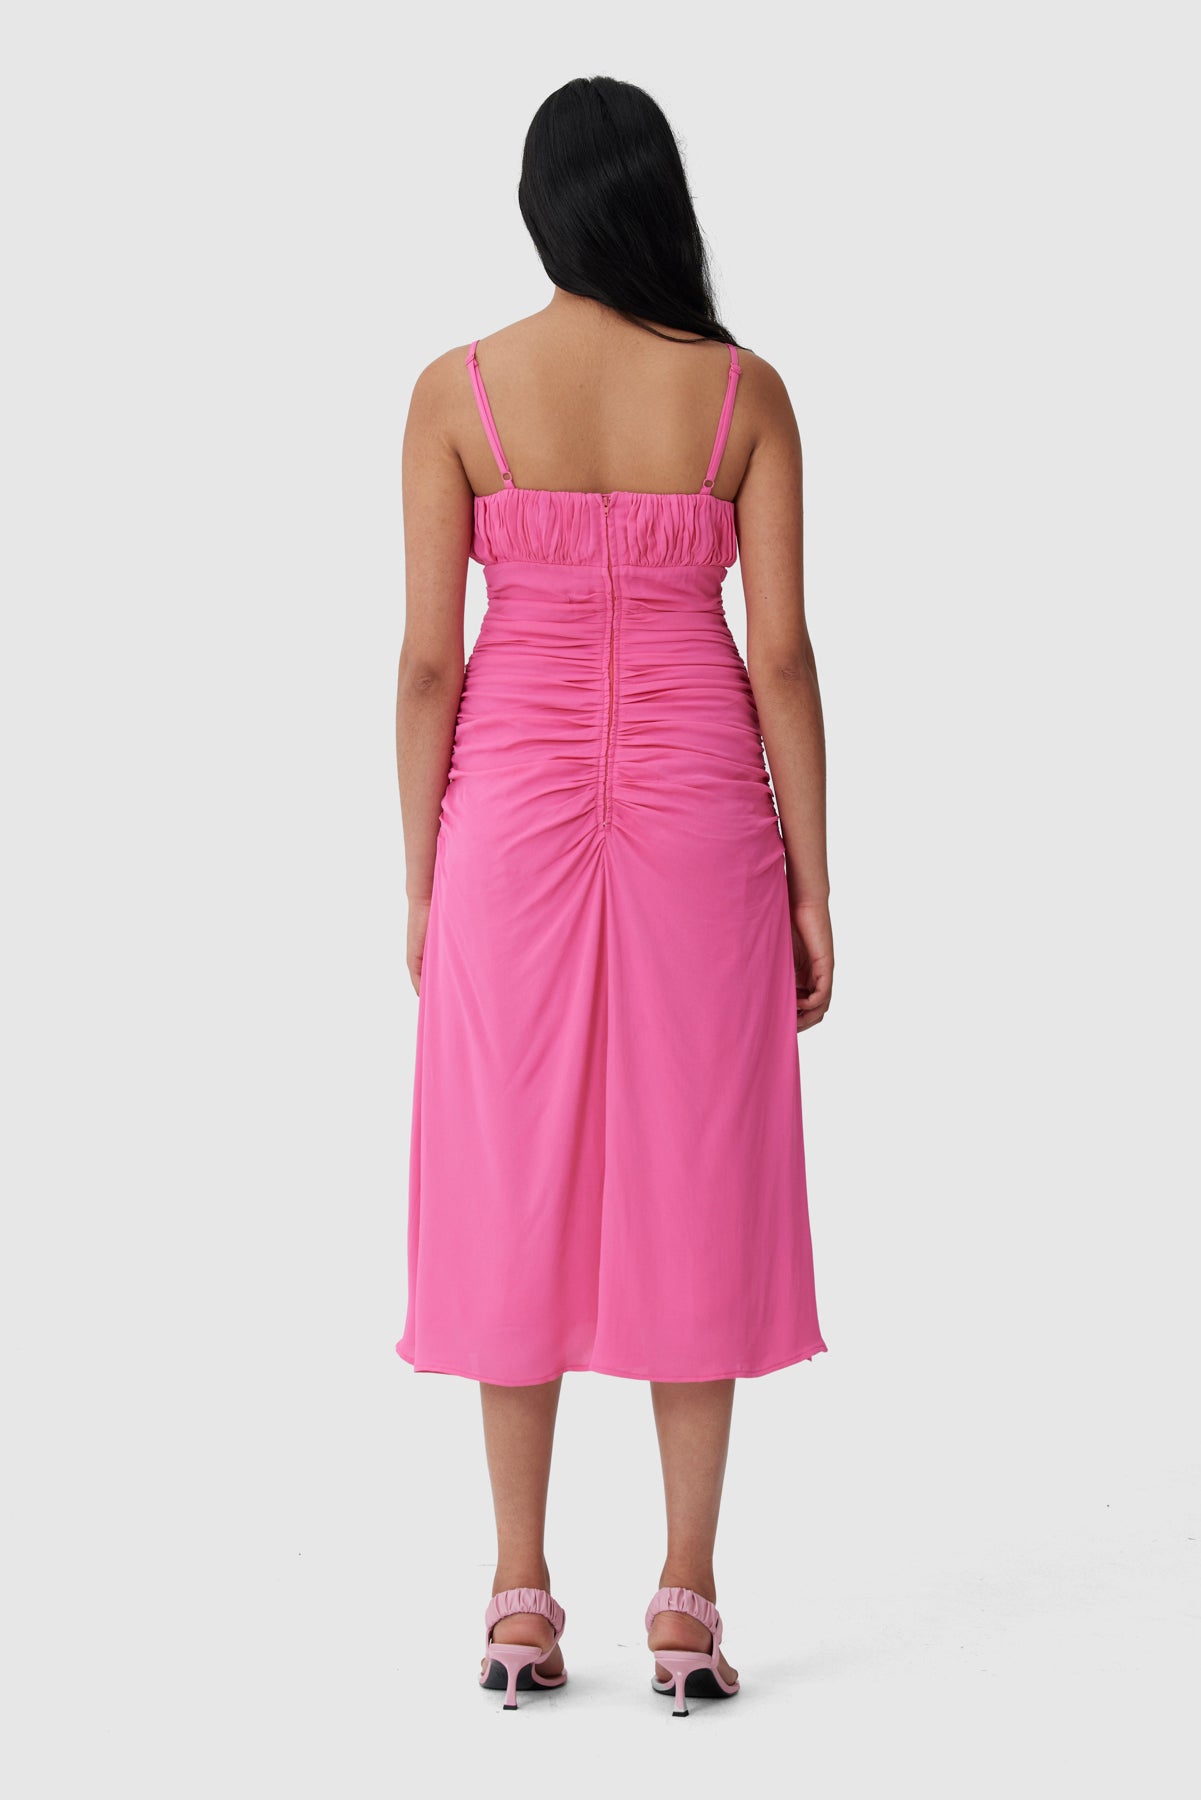 C/MEO Collective - She Knows Dress - Hot Pink